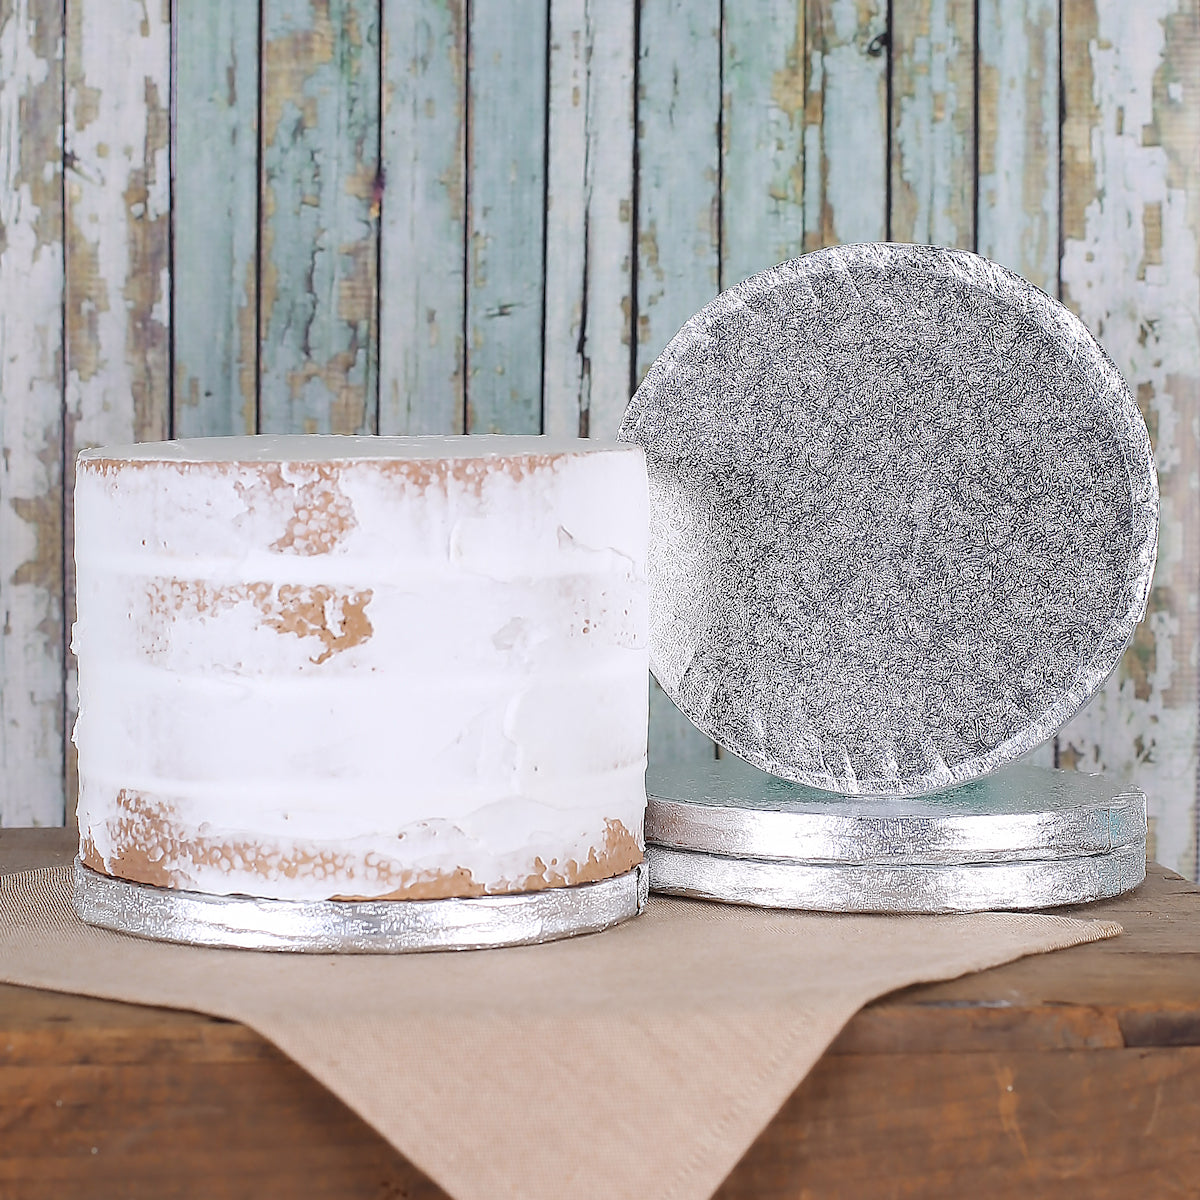 6 Inch Cake Boards: Thick Silver | www.sprinklebeesweet.com